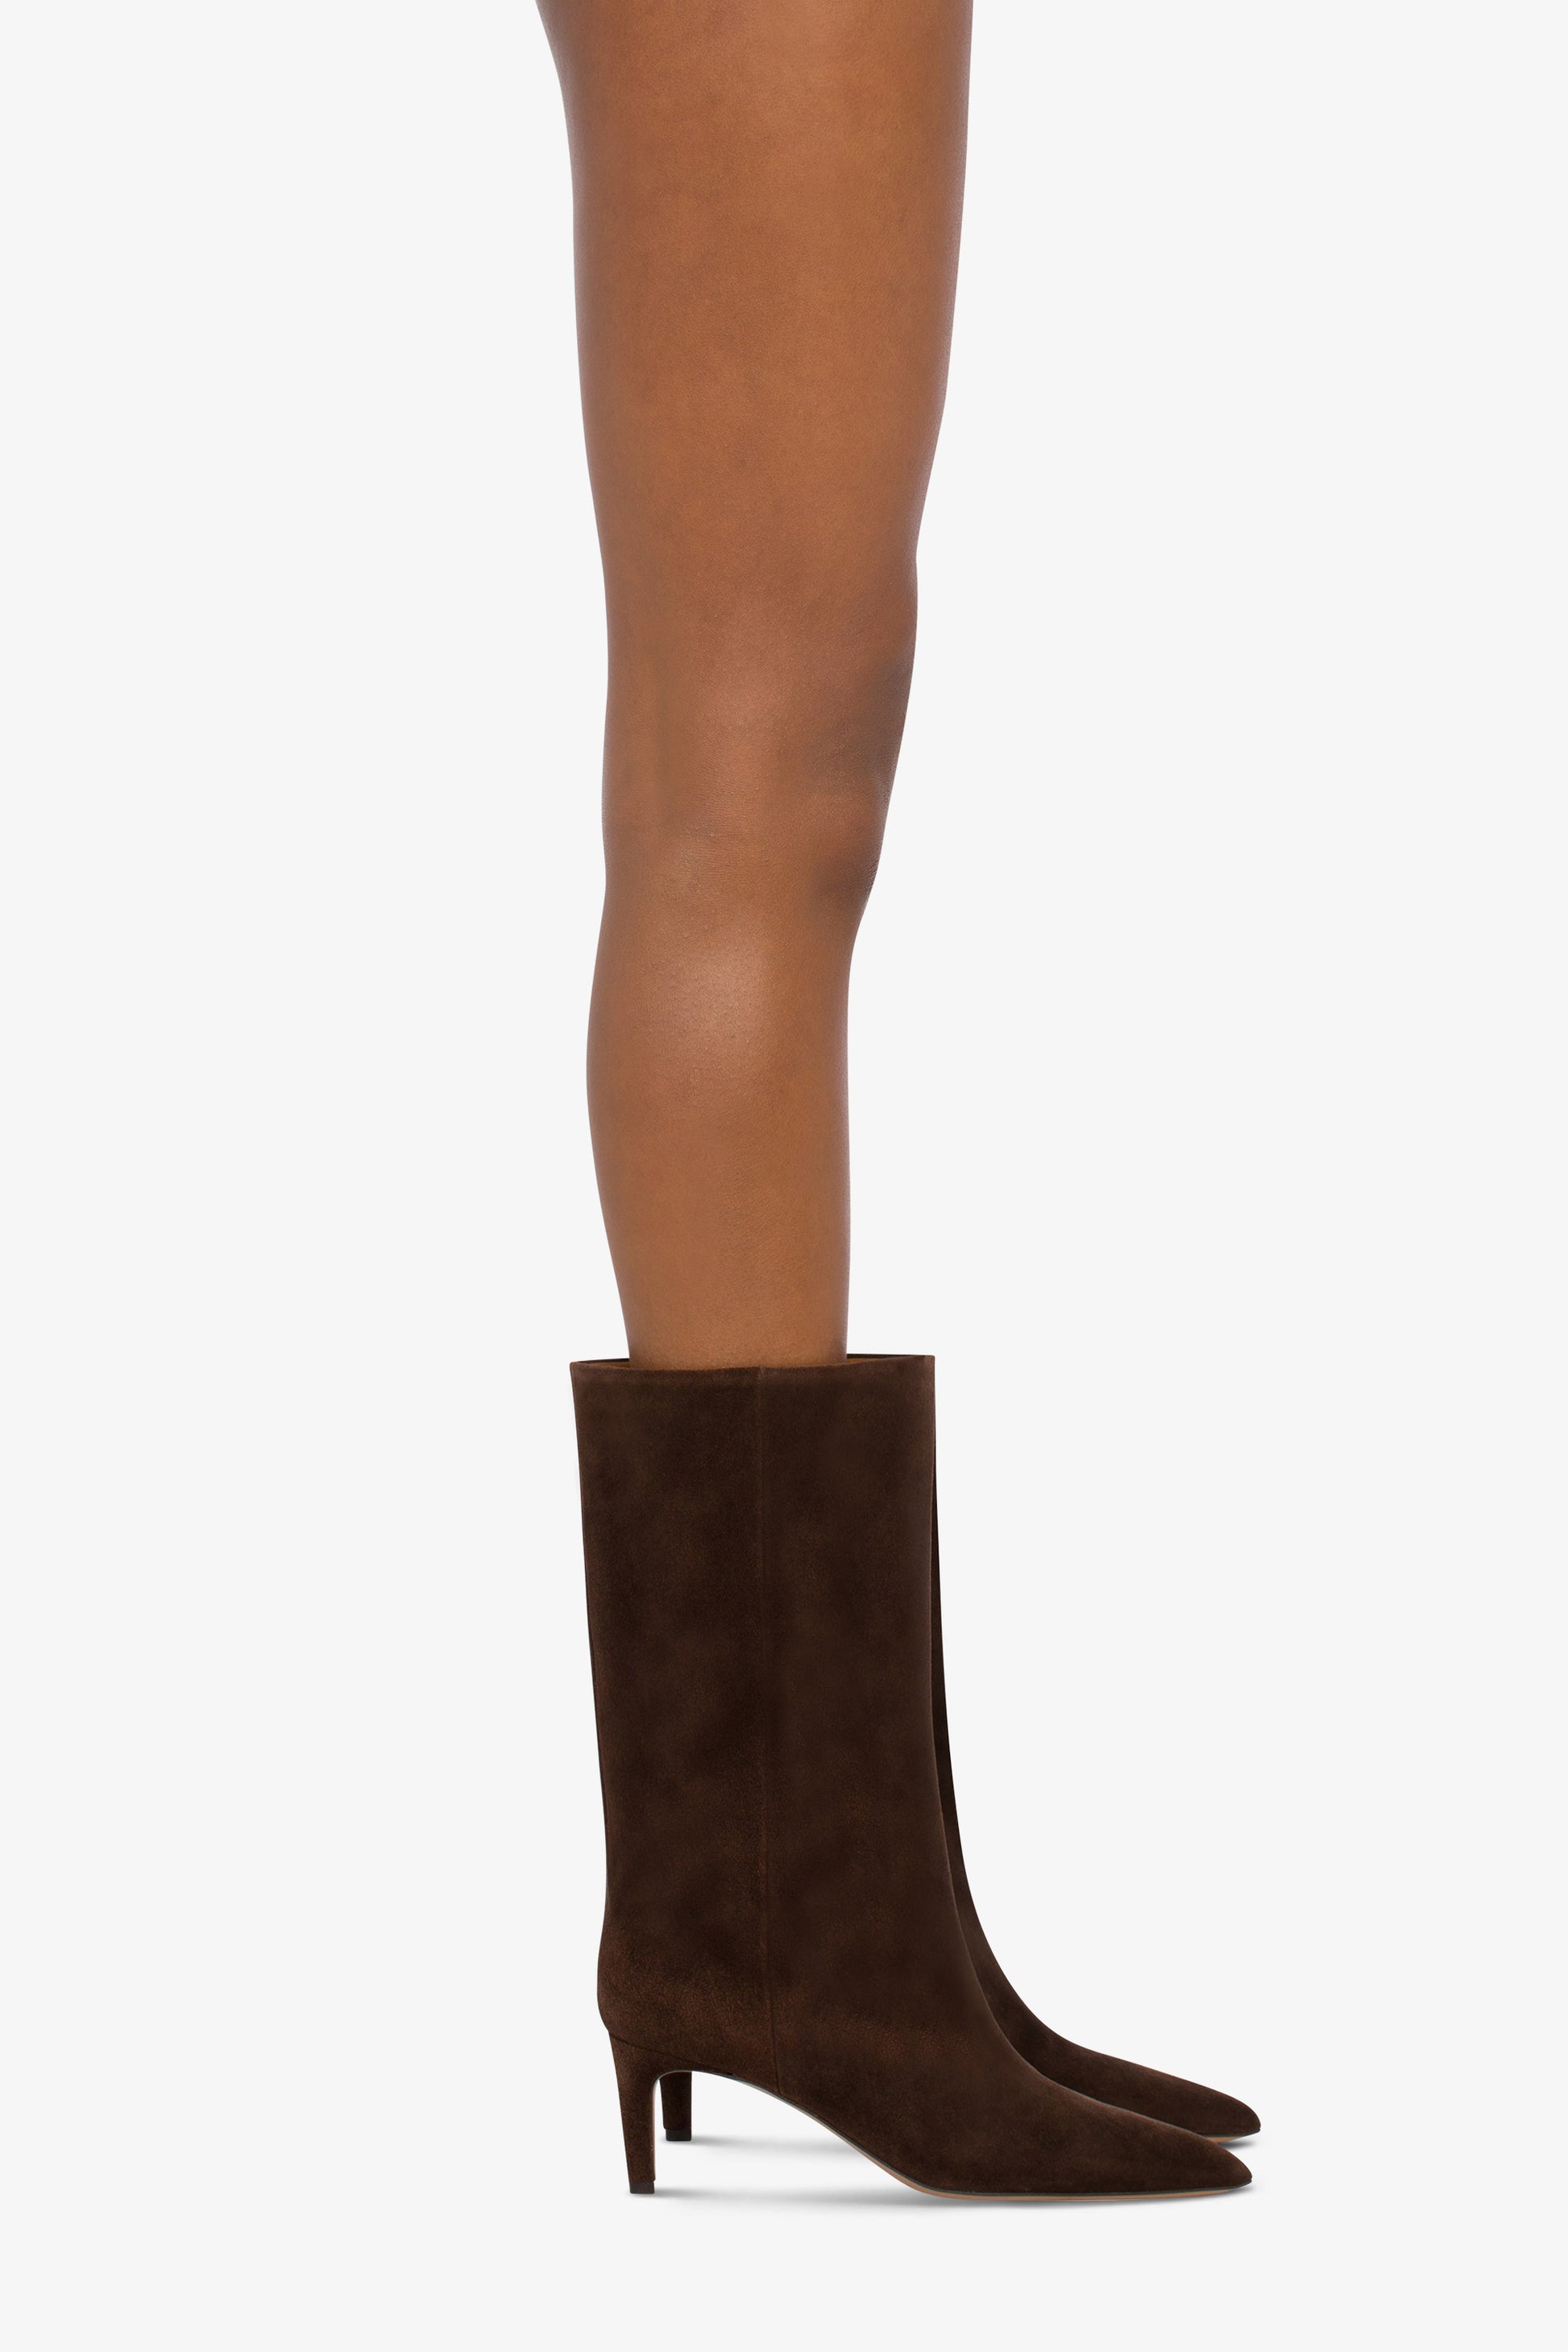 Calf-high boots in smooth pepper suede leather - Indossato